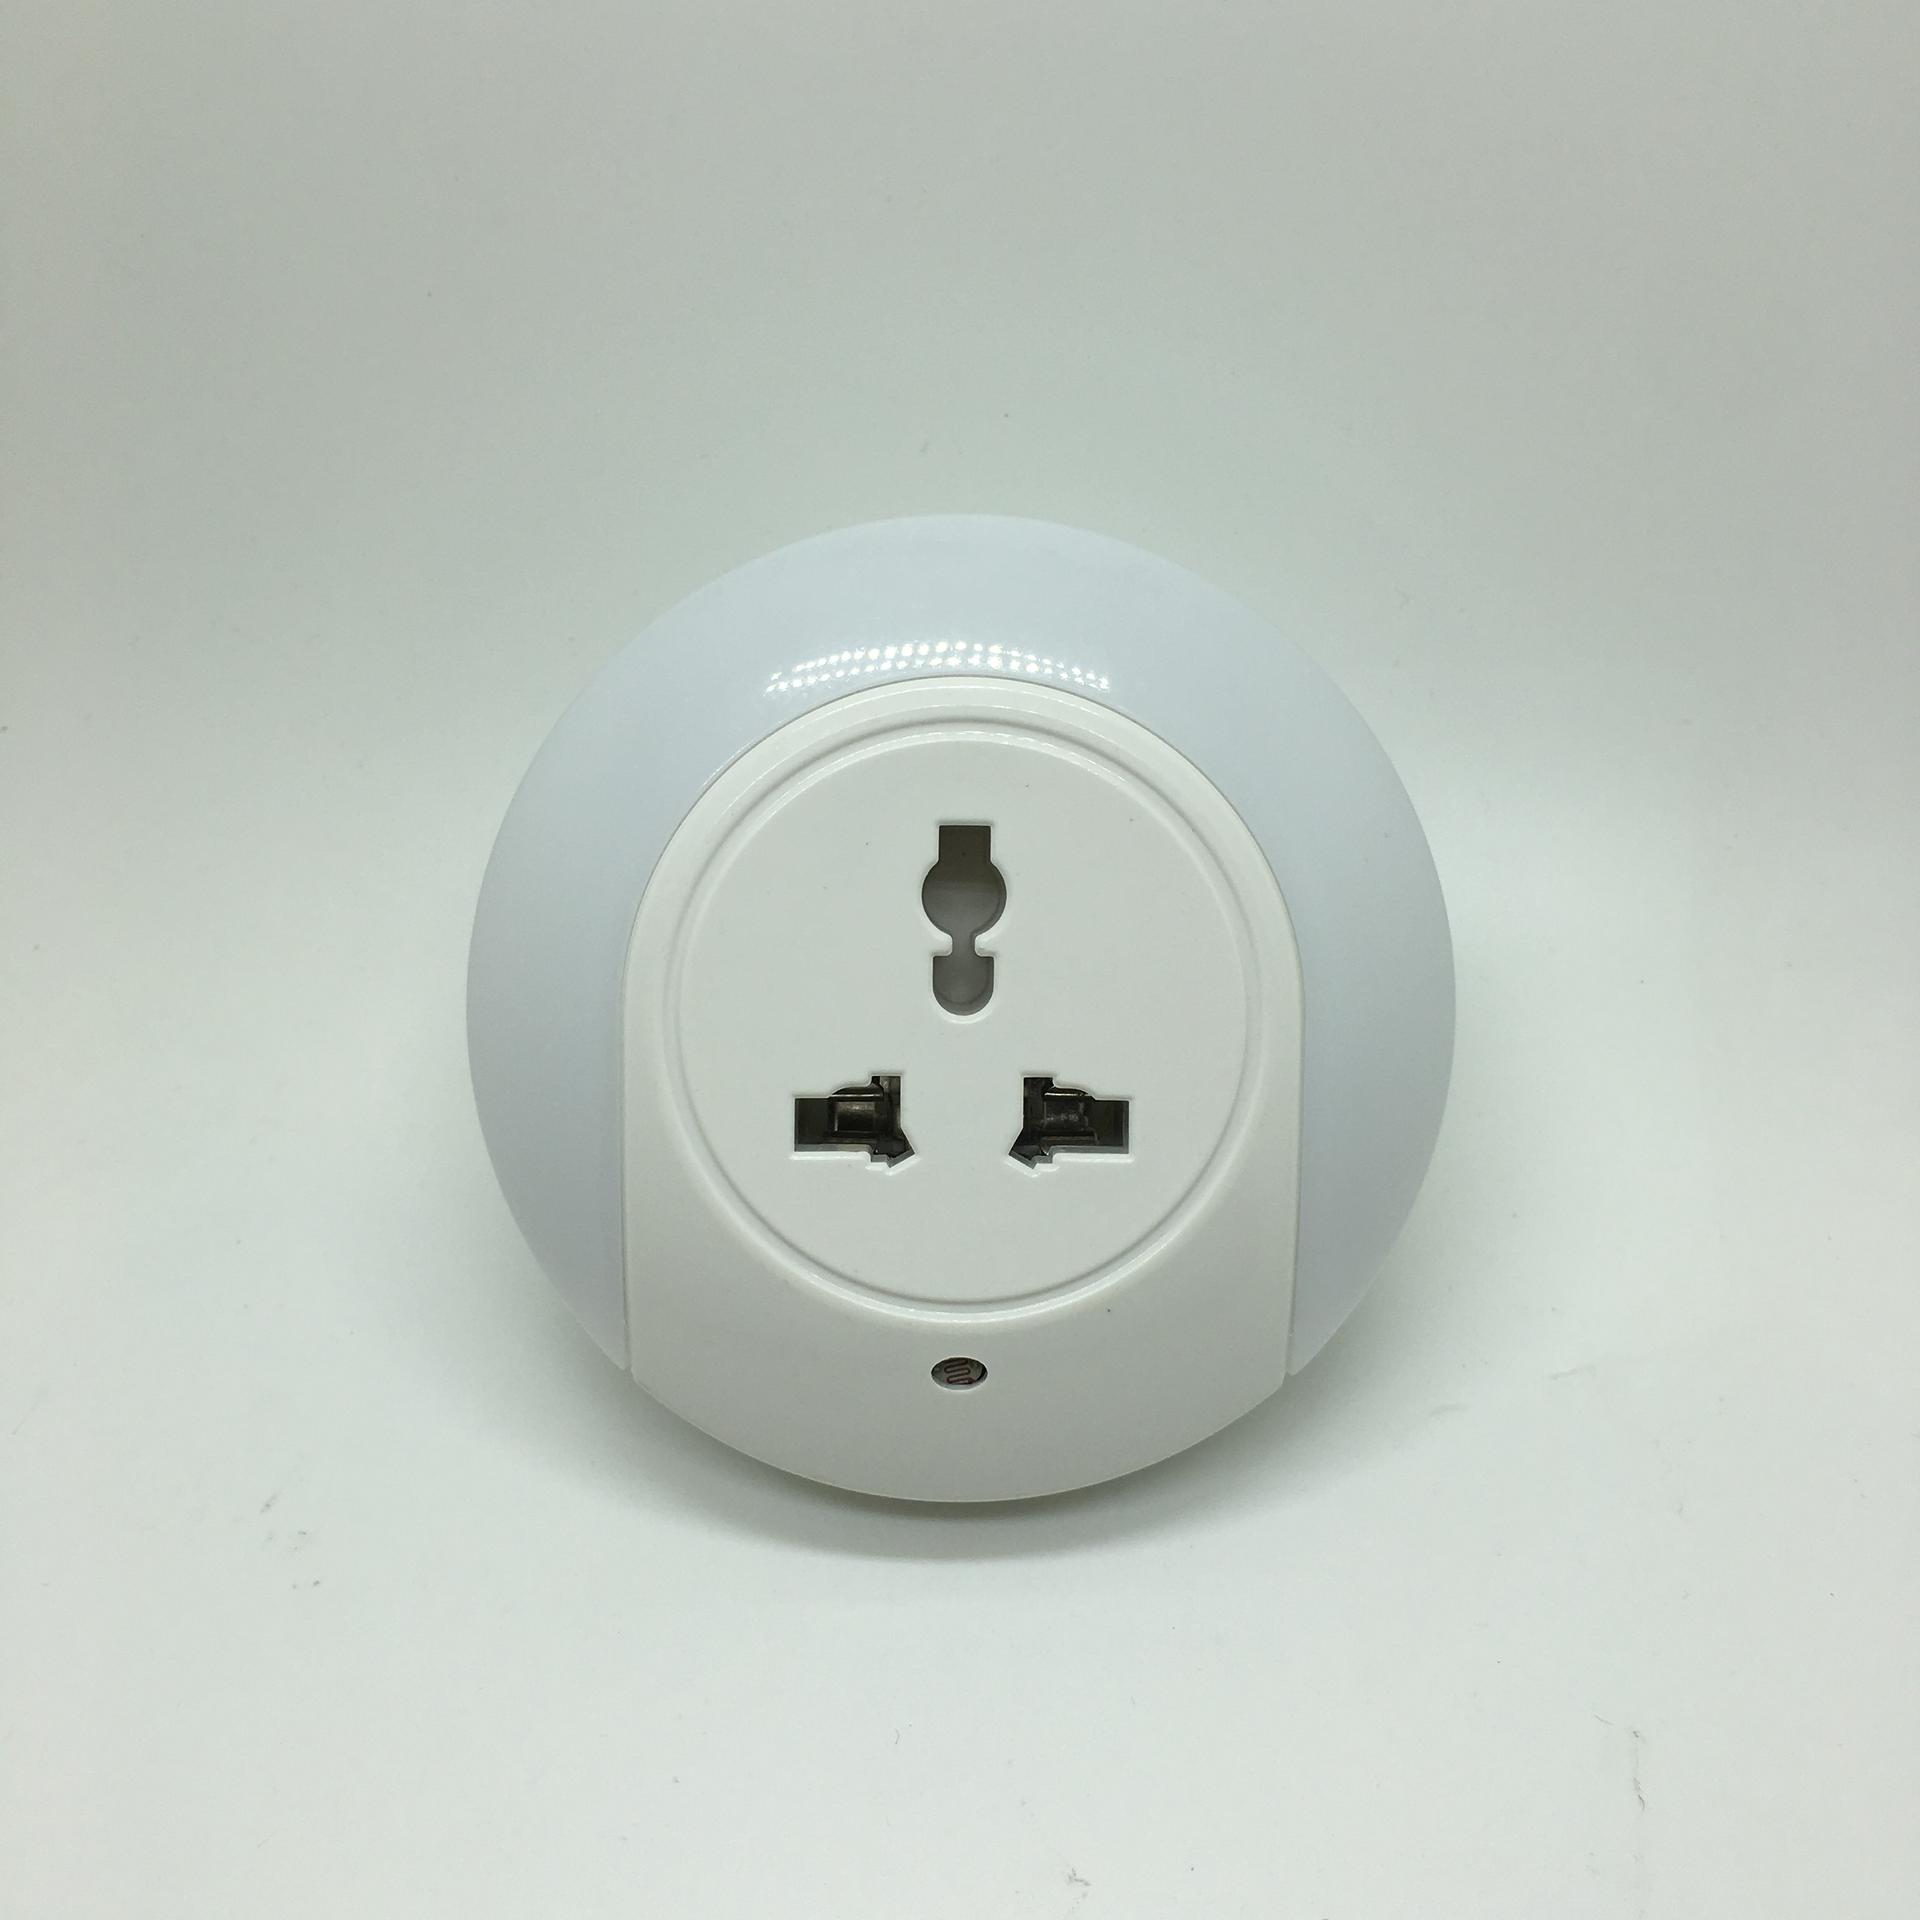 OEM A78C BEST SALE SENSOR PLUG IN NIGHT LIGHT 5V 2A WALL CHARGER LAMP LEDWITH BS SOCKET DUSK TO DAWN